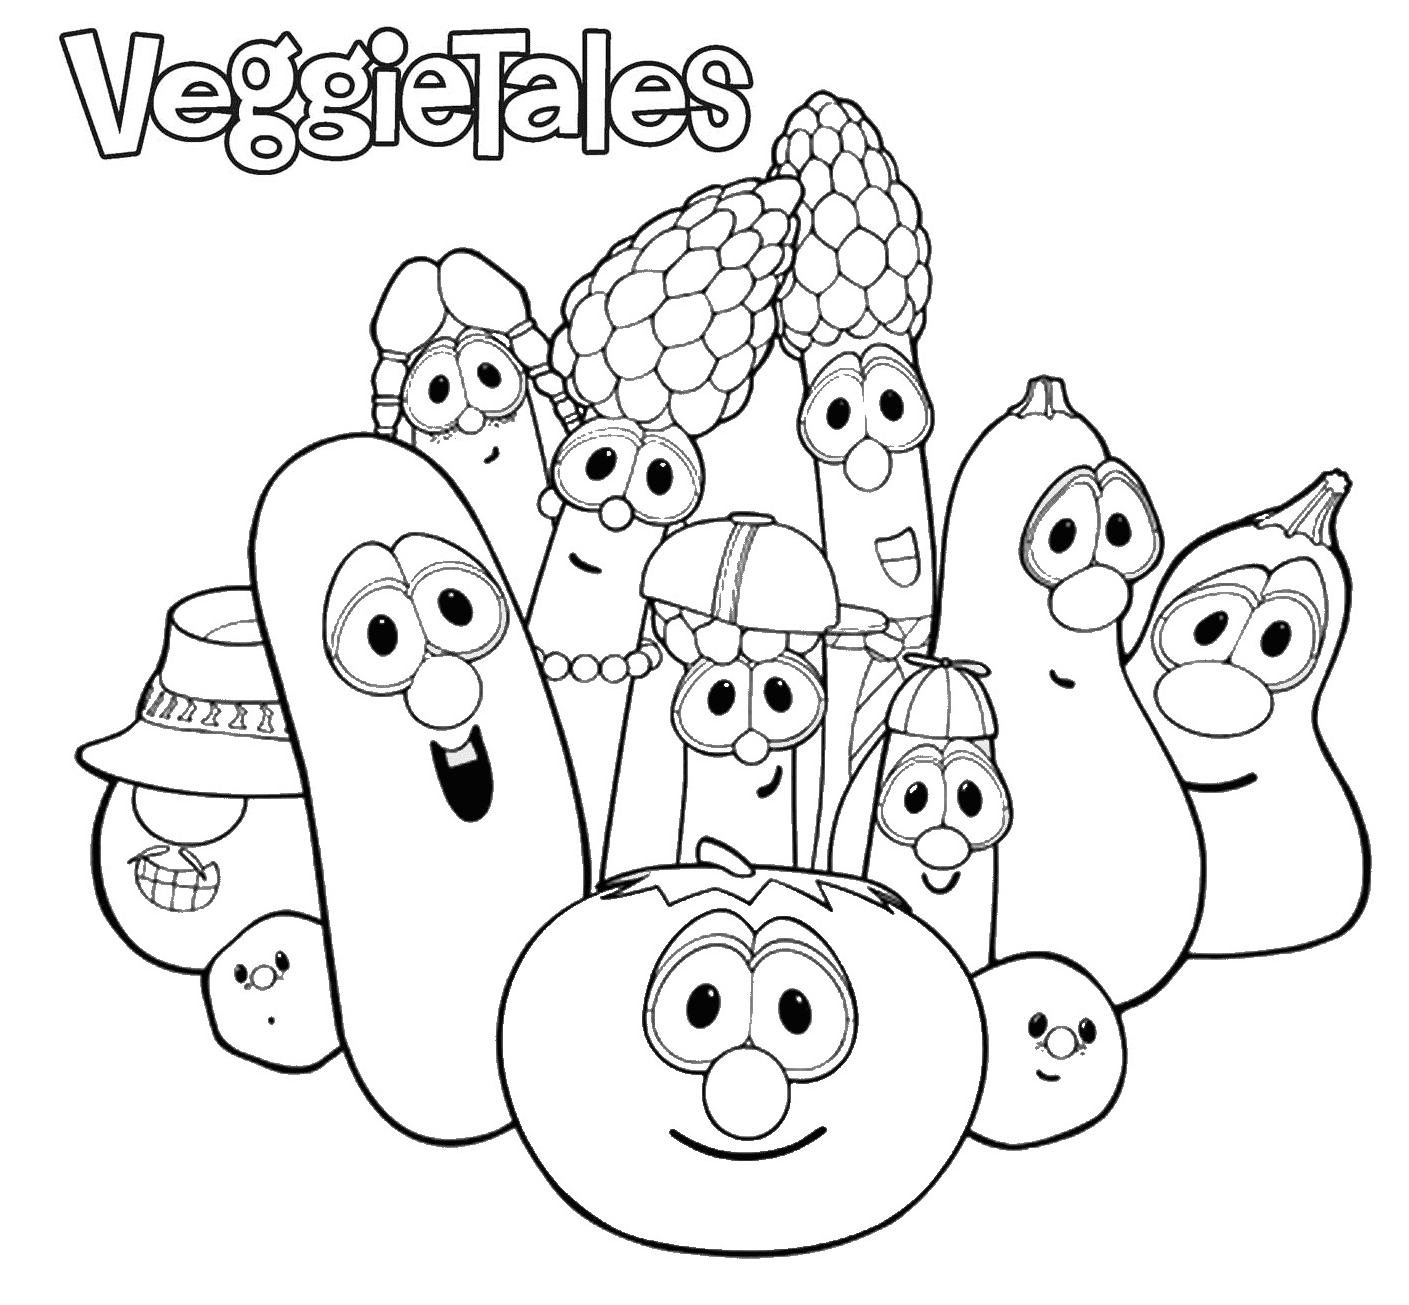 veggietales in the house coloring page ideas